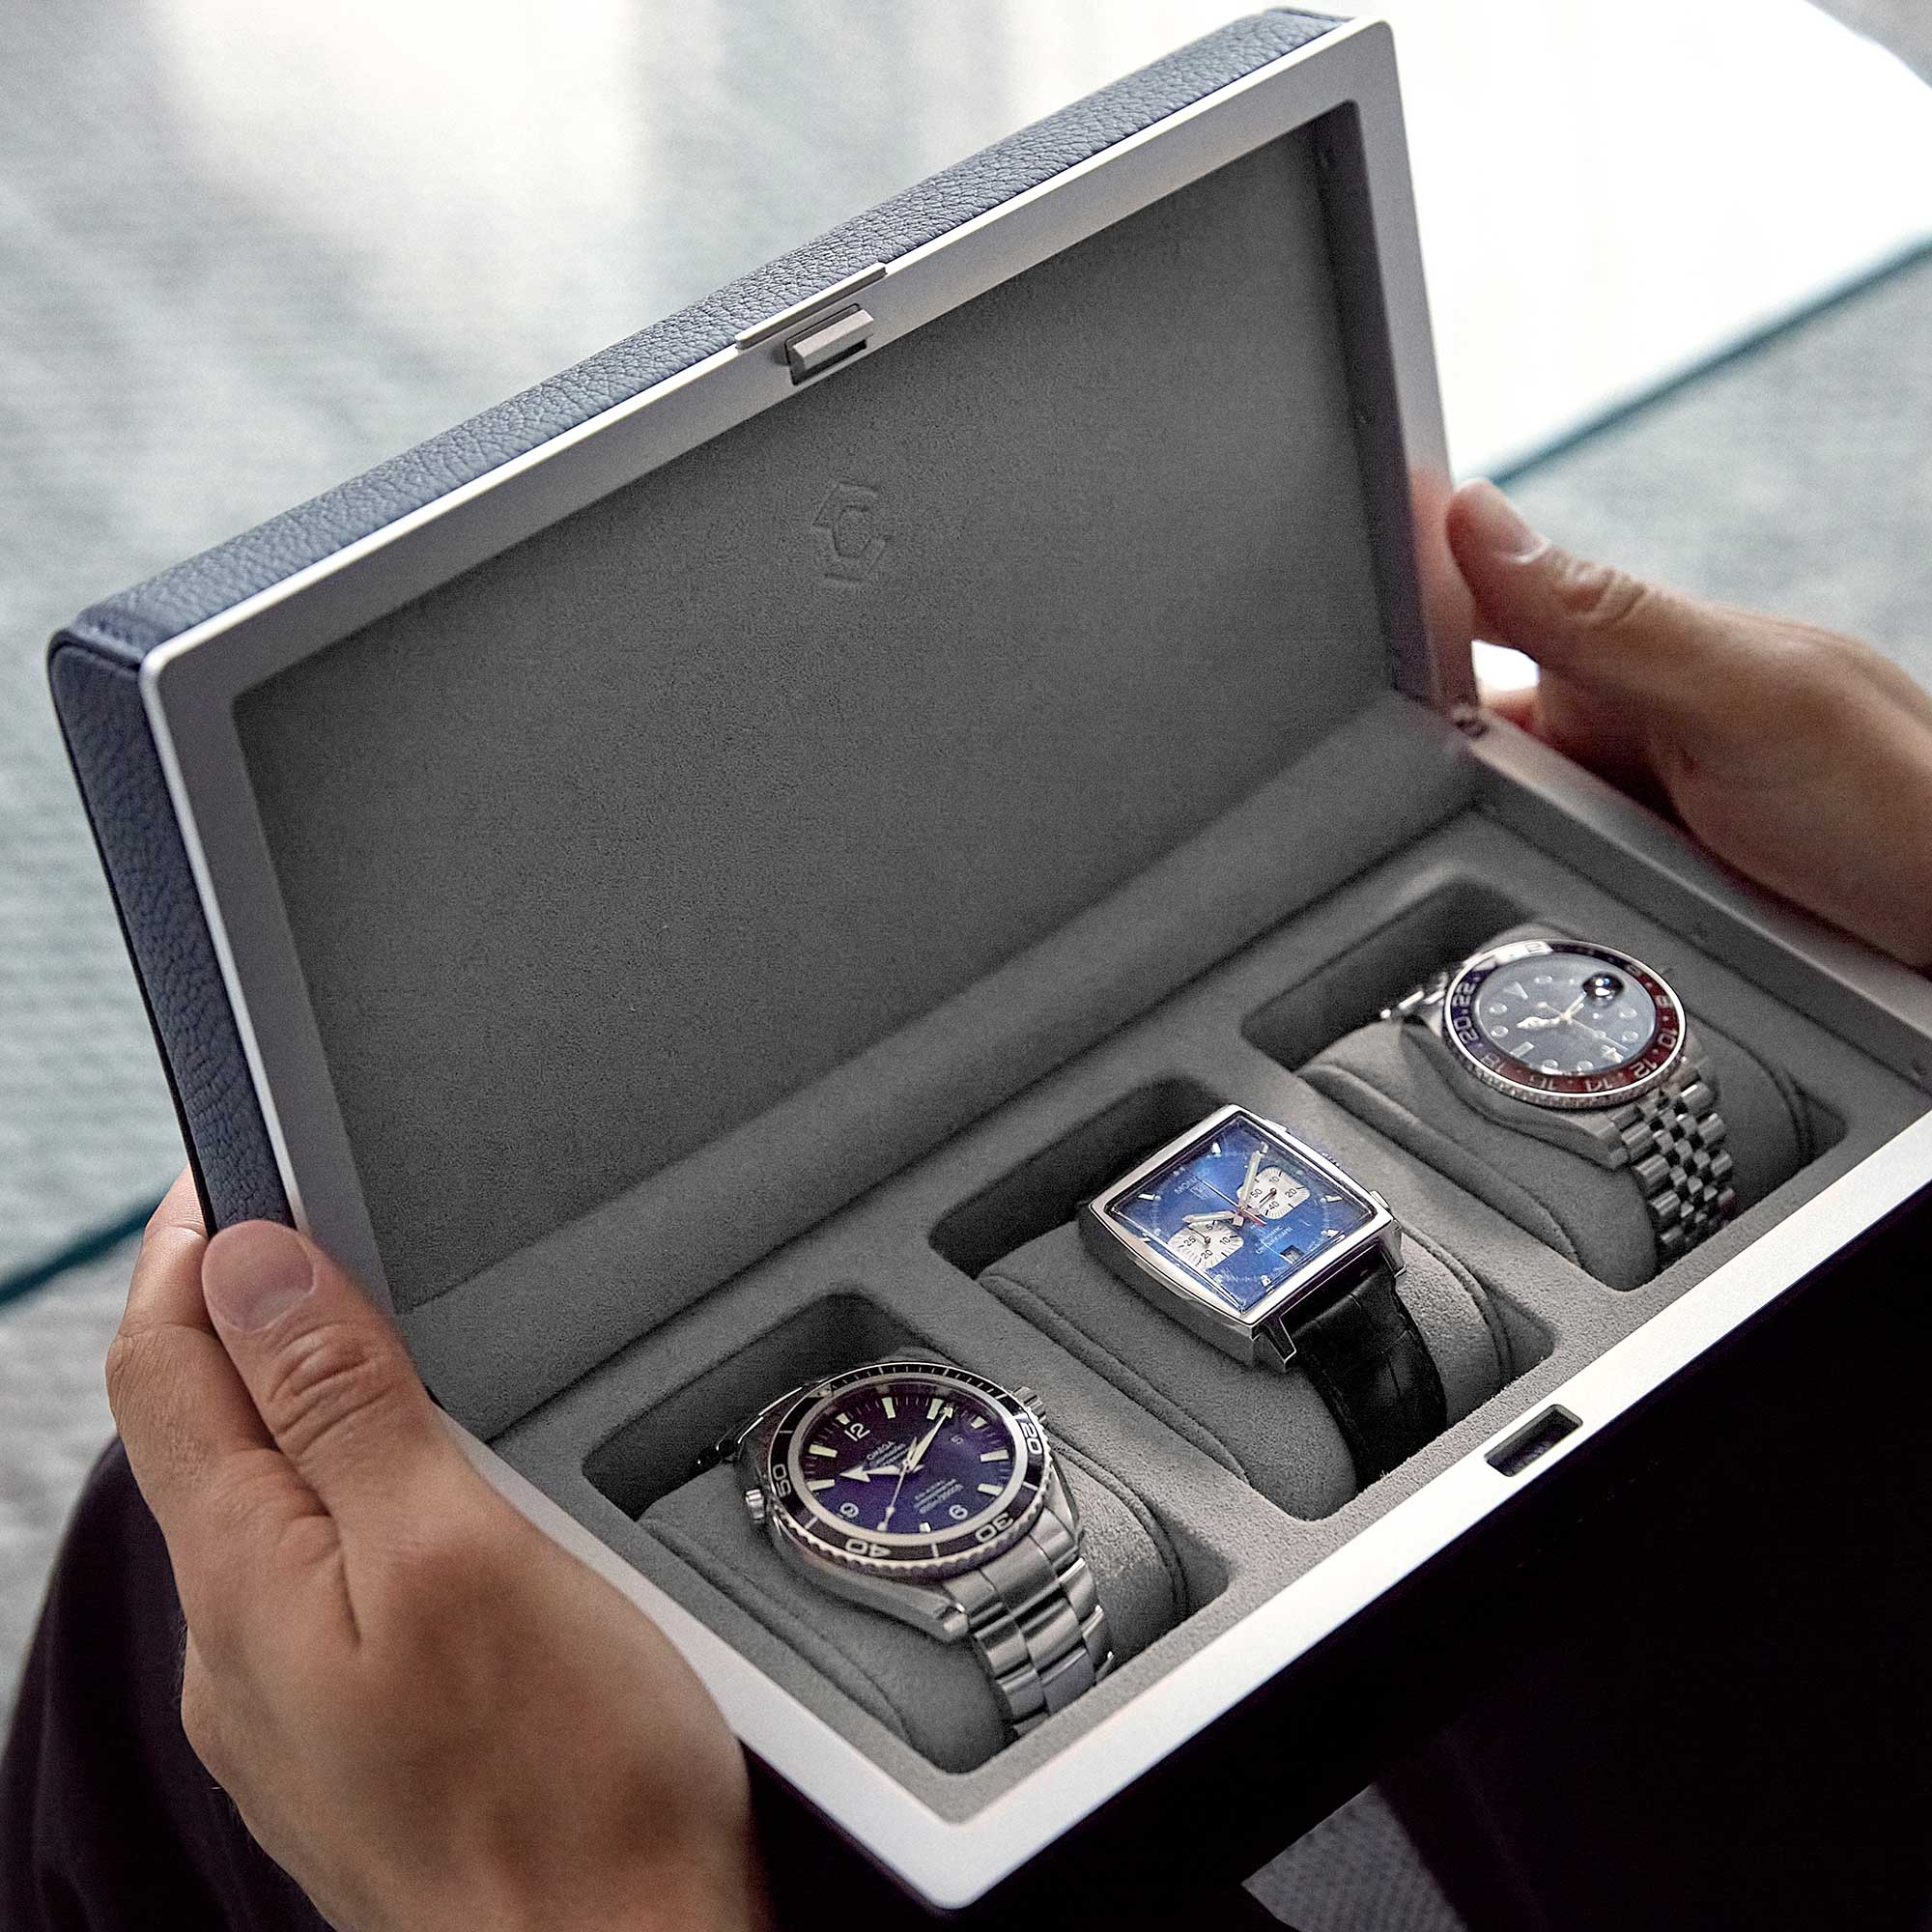 Lifestyle shot of open Eaton 3 watch case containing three luxury men’s watches